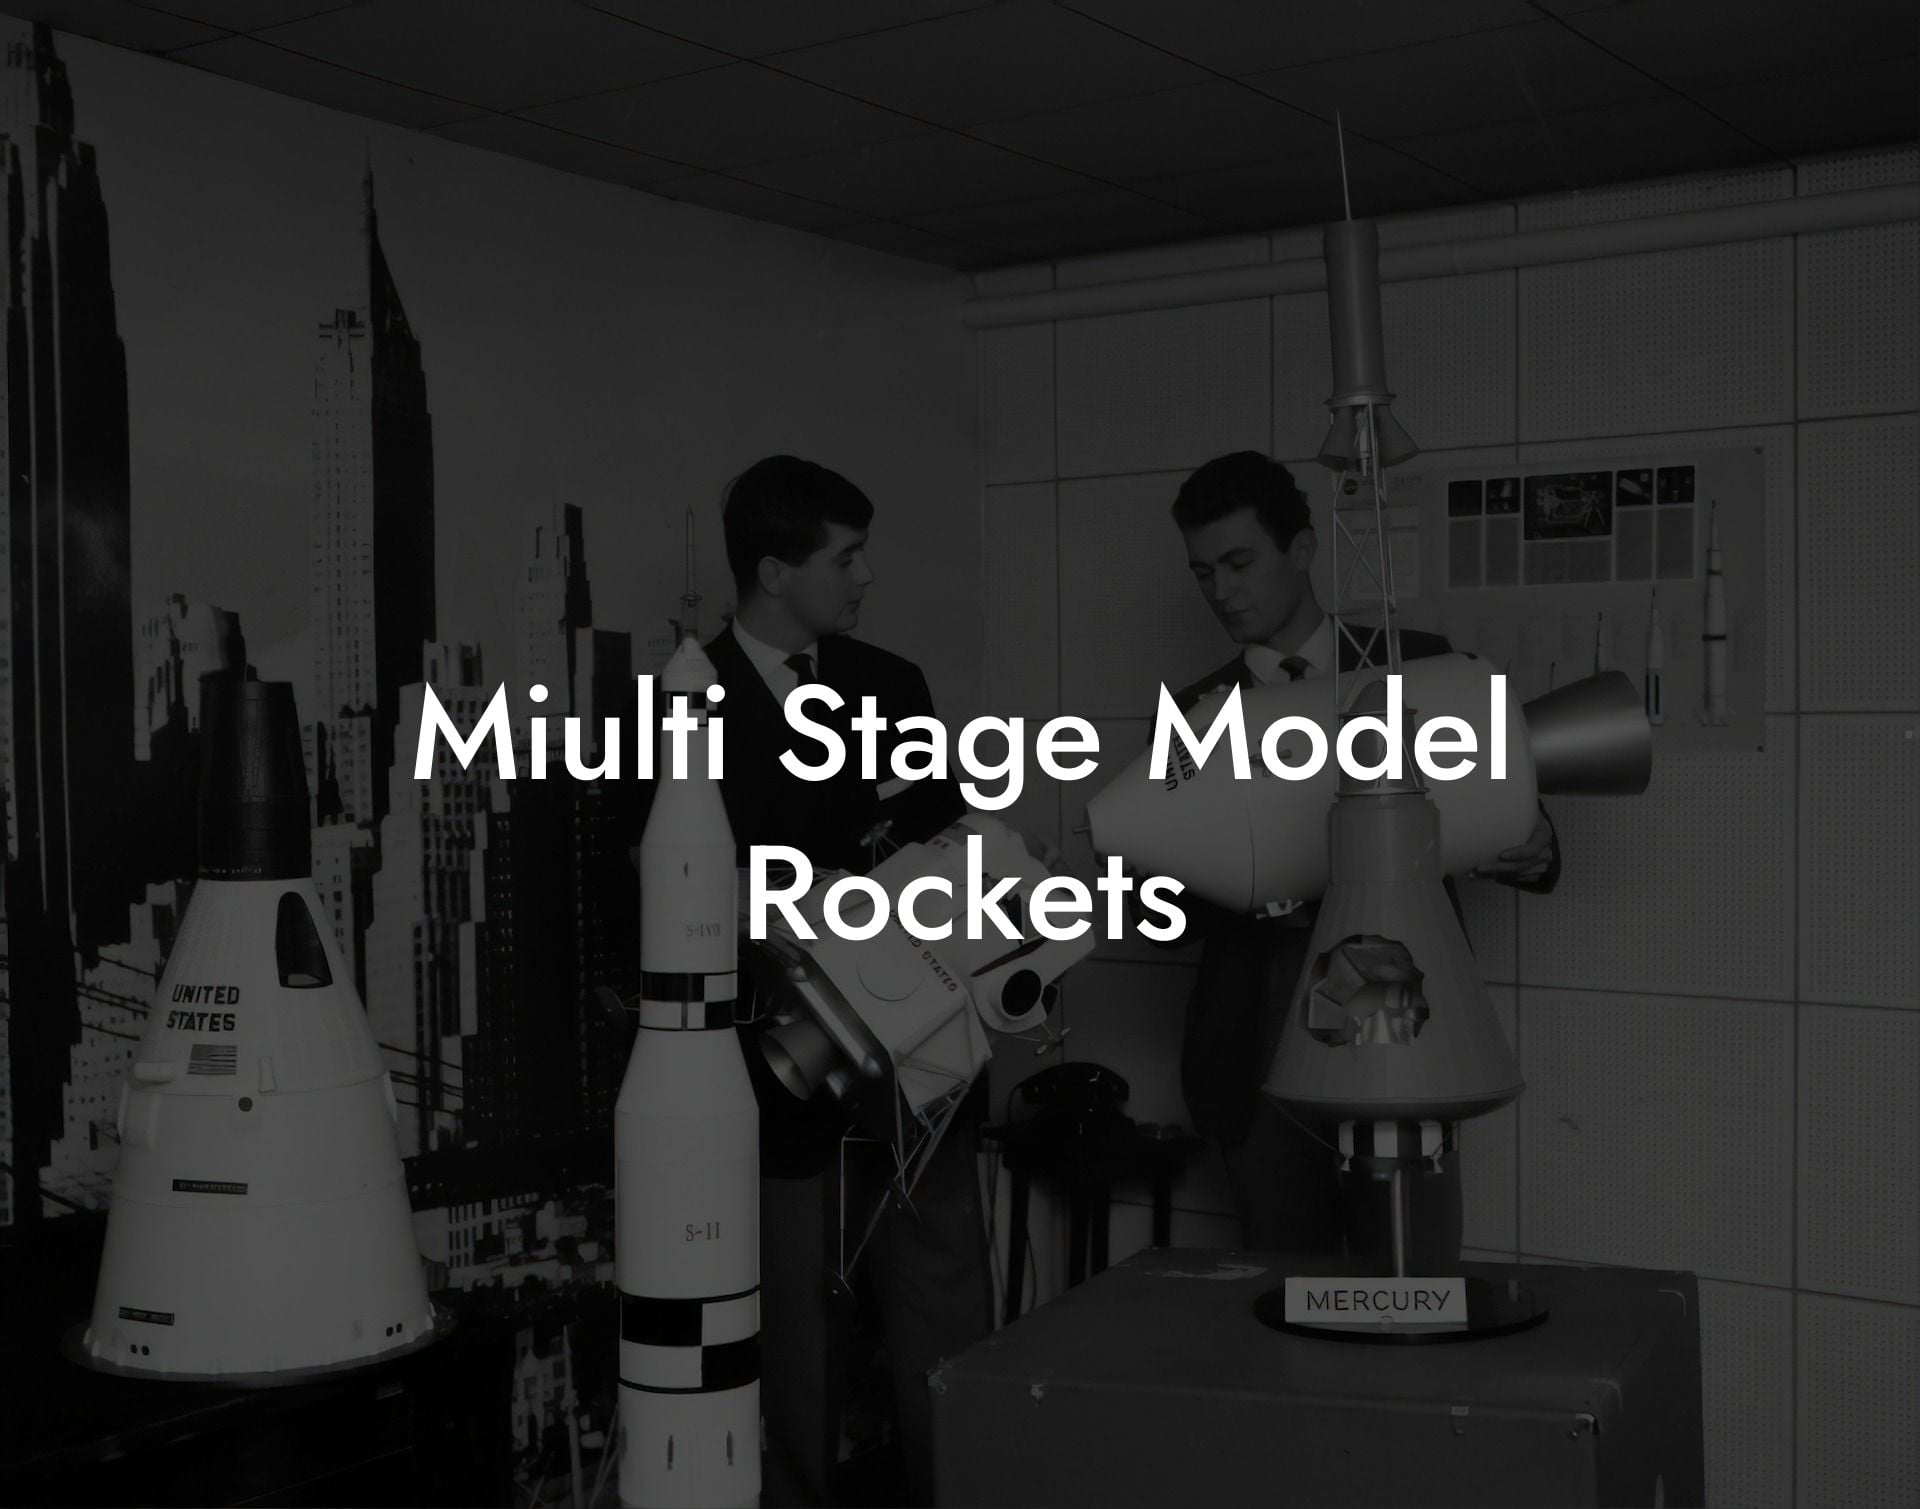 Miulti Stage Model Rockets